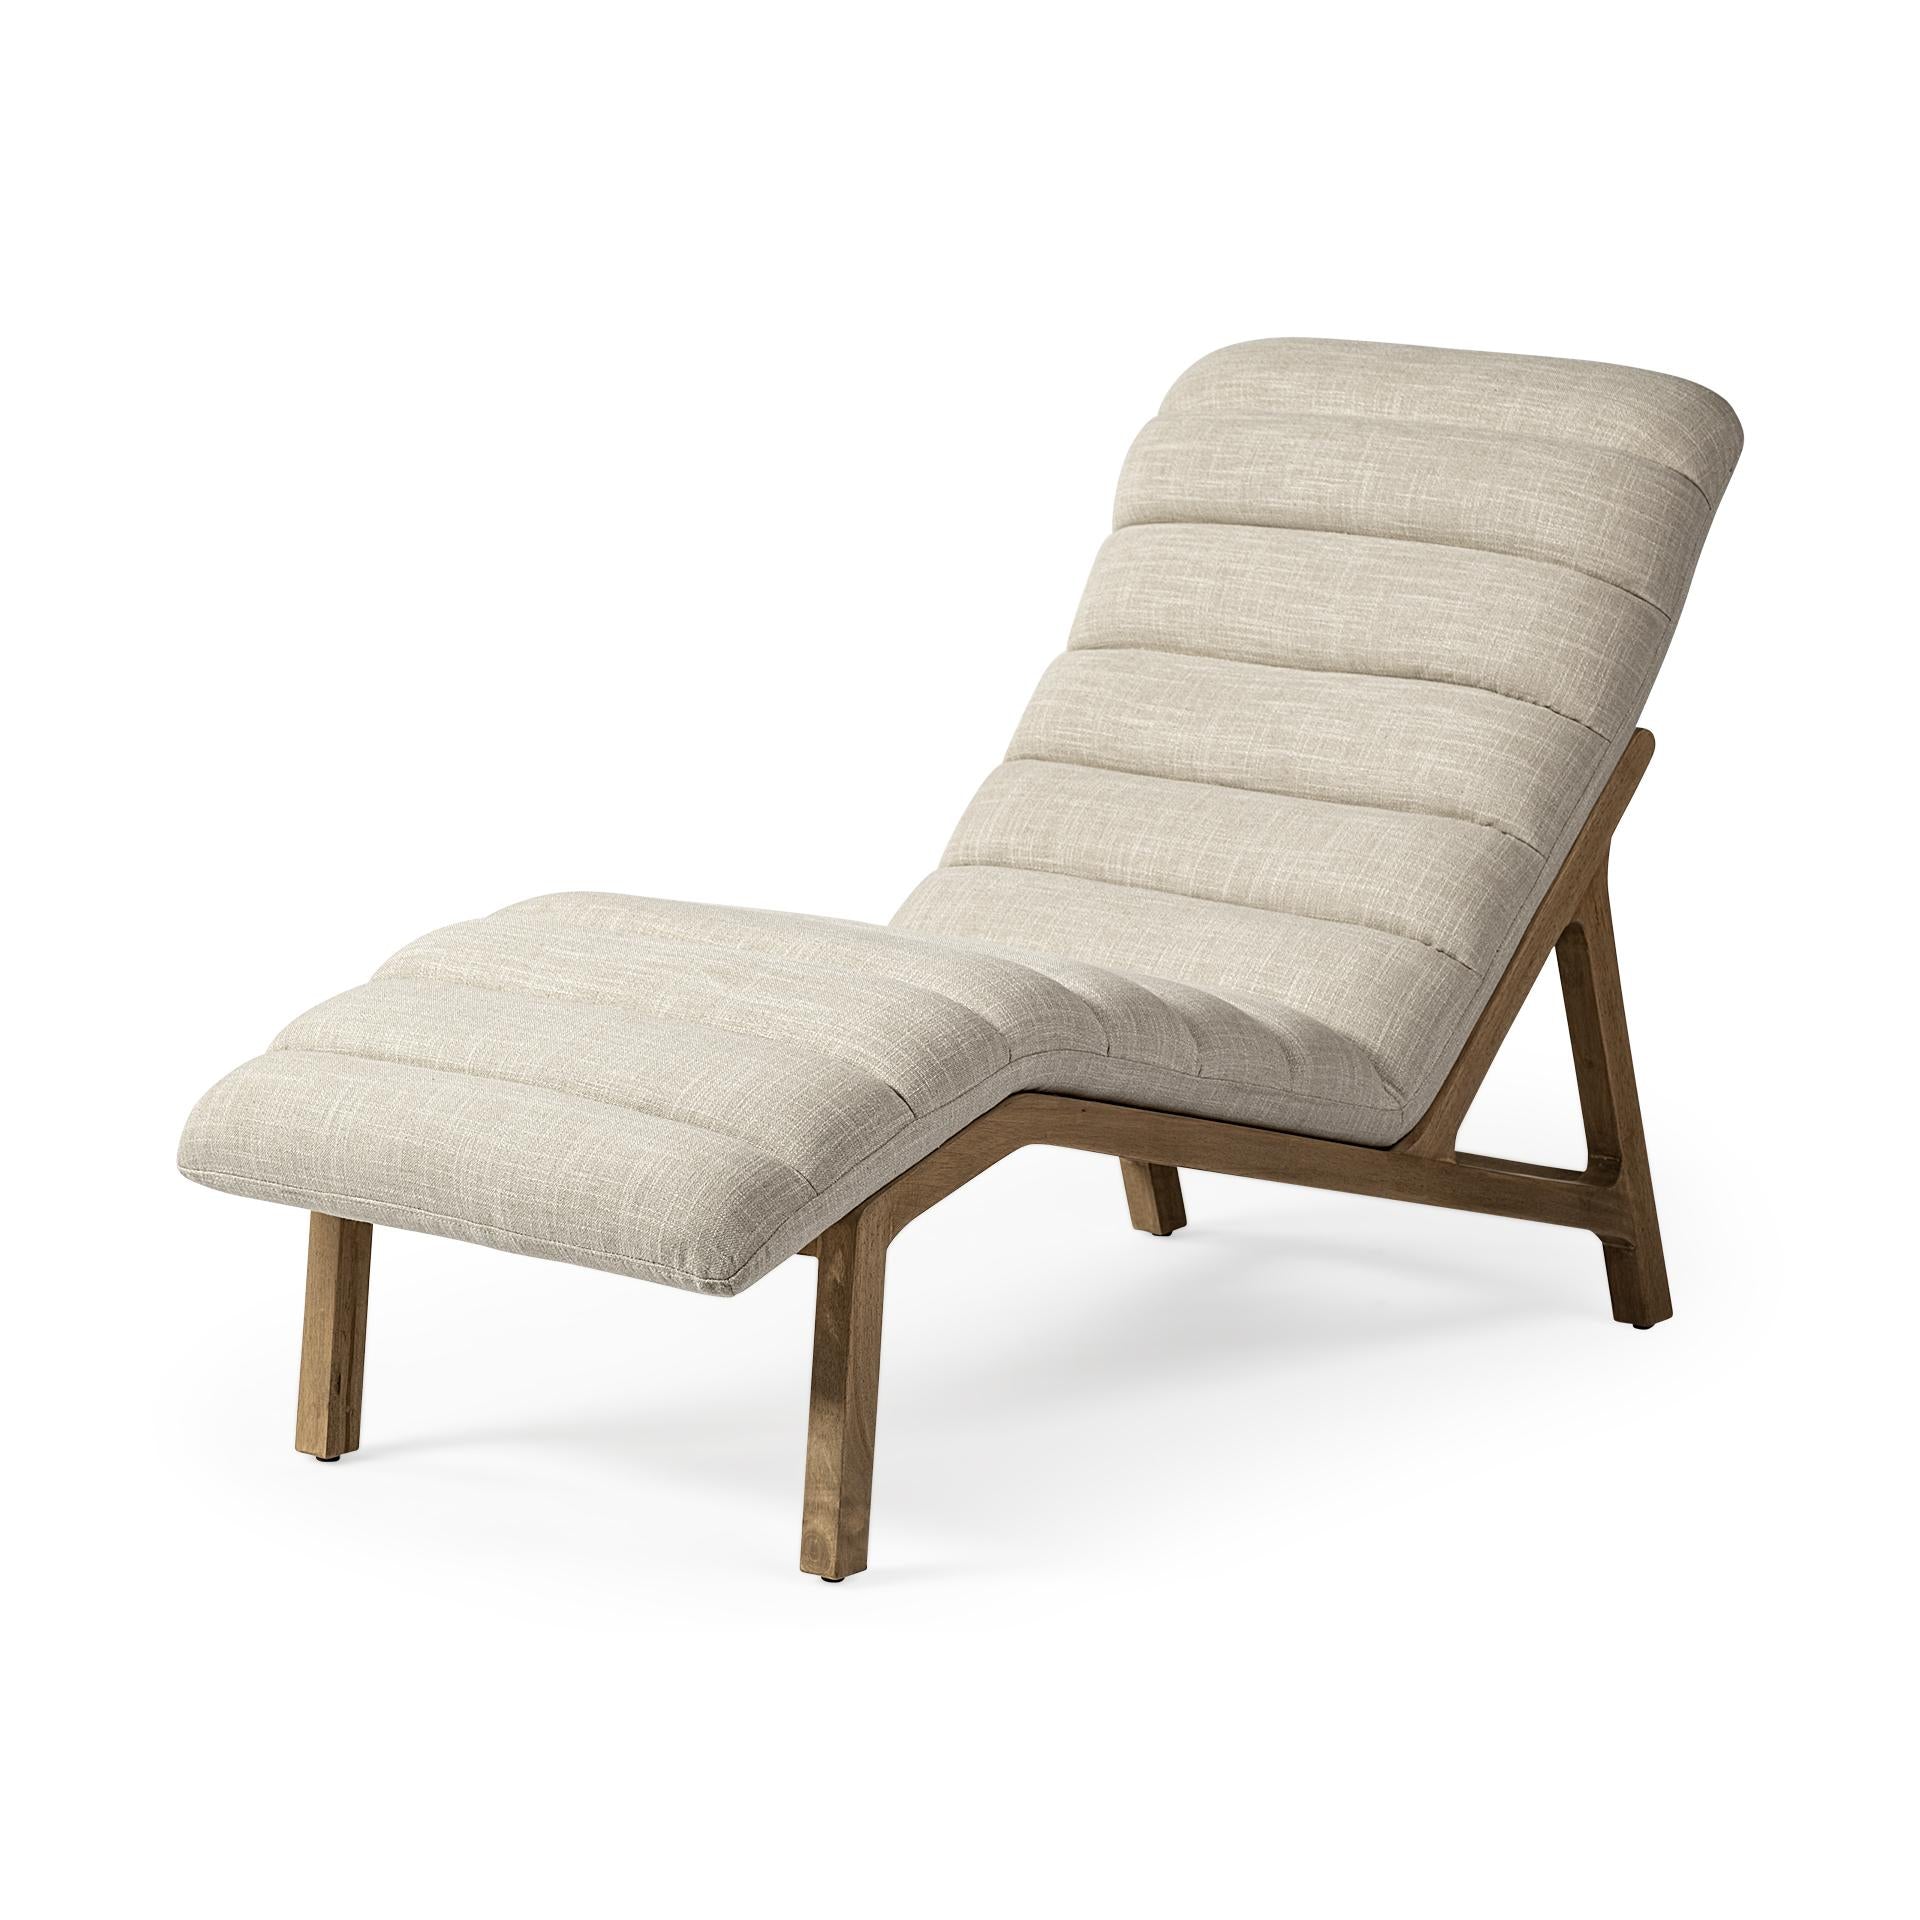 Modern Cream Fabric Upholstered Chaise Lounge Chair With Solid Wood Frame And Base Default Title